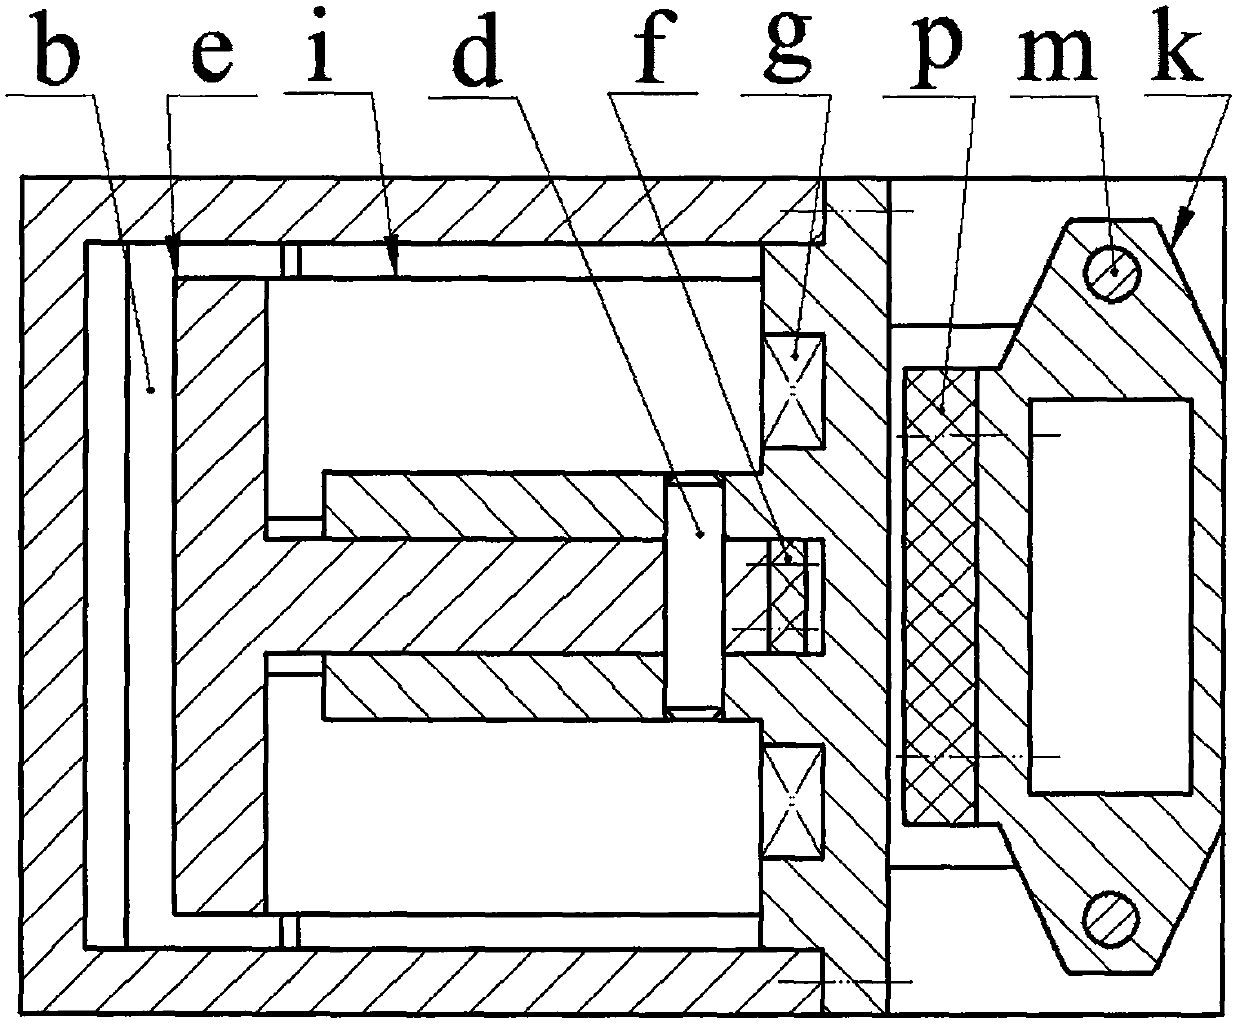 Magnetic coupling step-by-step excitation type fluid energy harvester